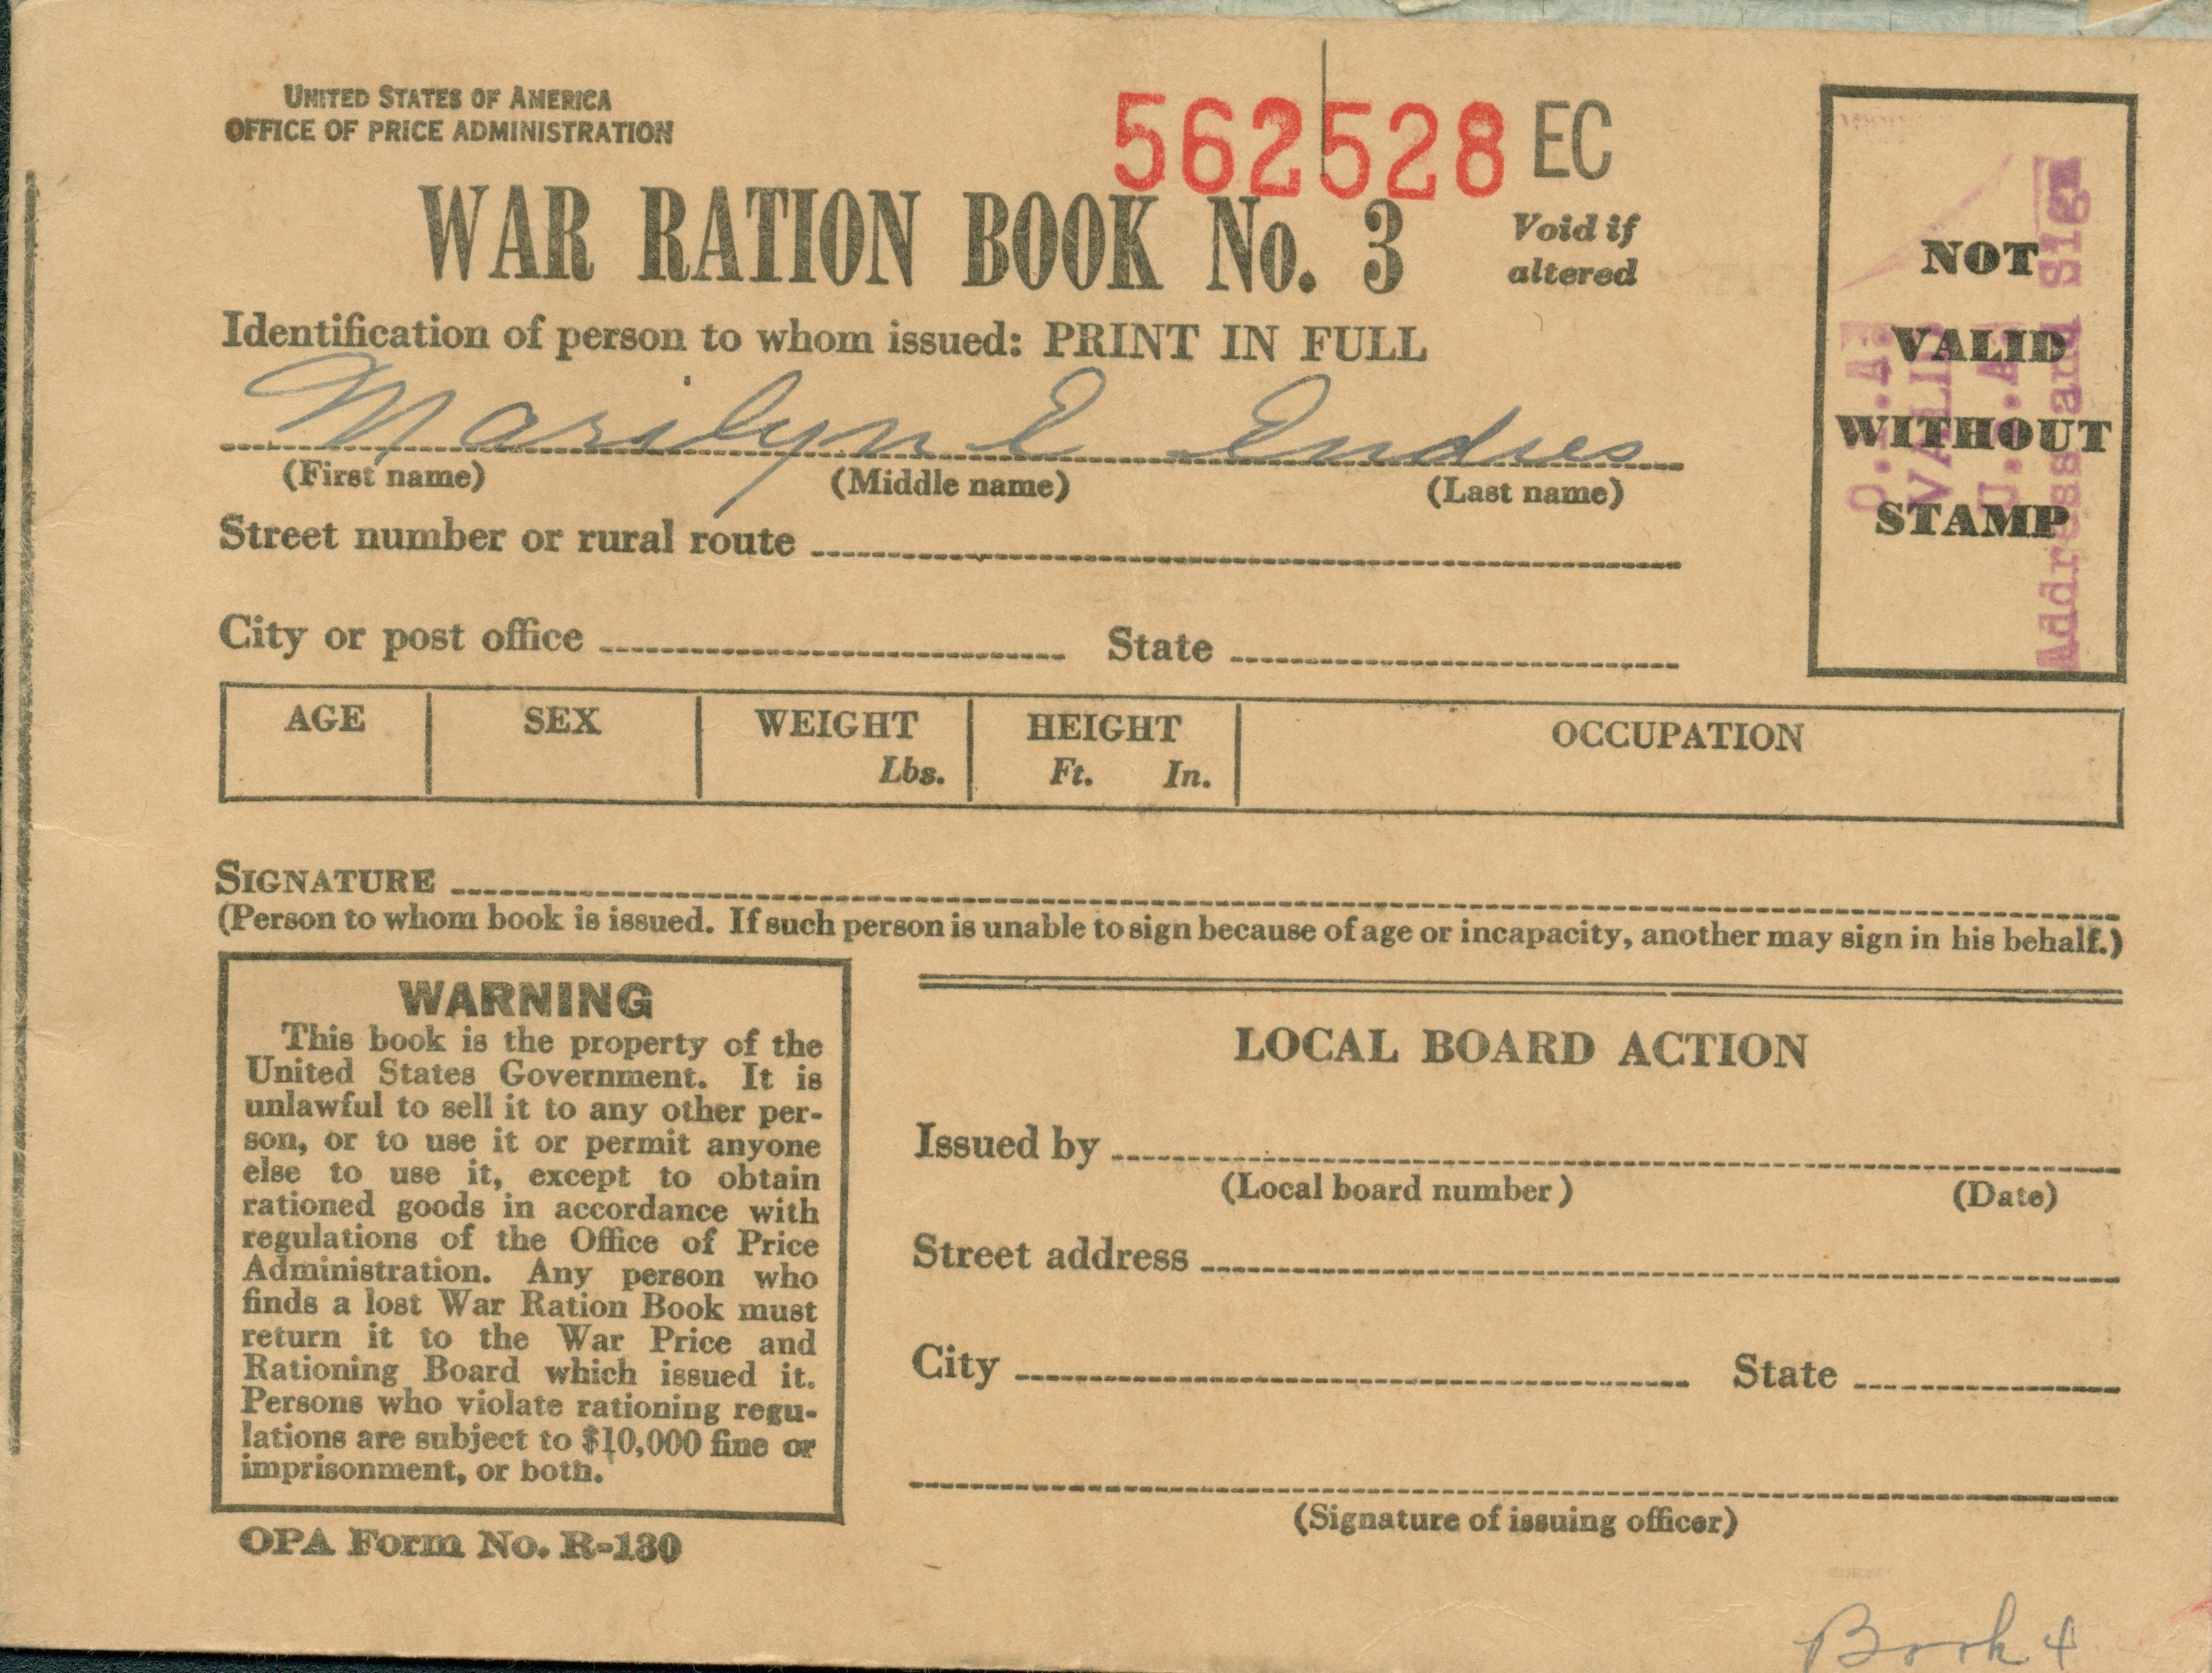 Front cover of the war ration booklet has spaces for owner information